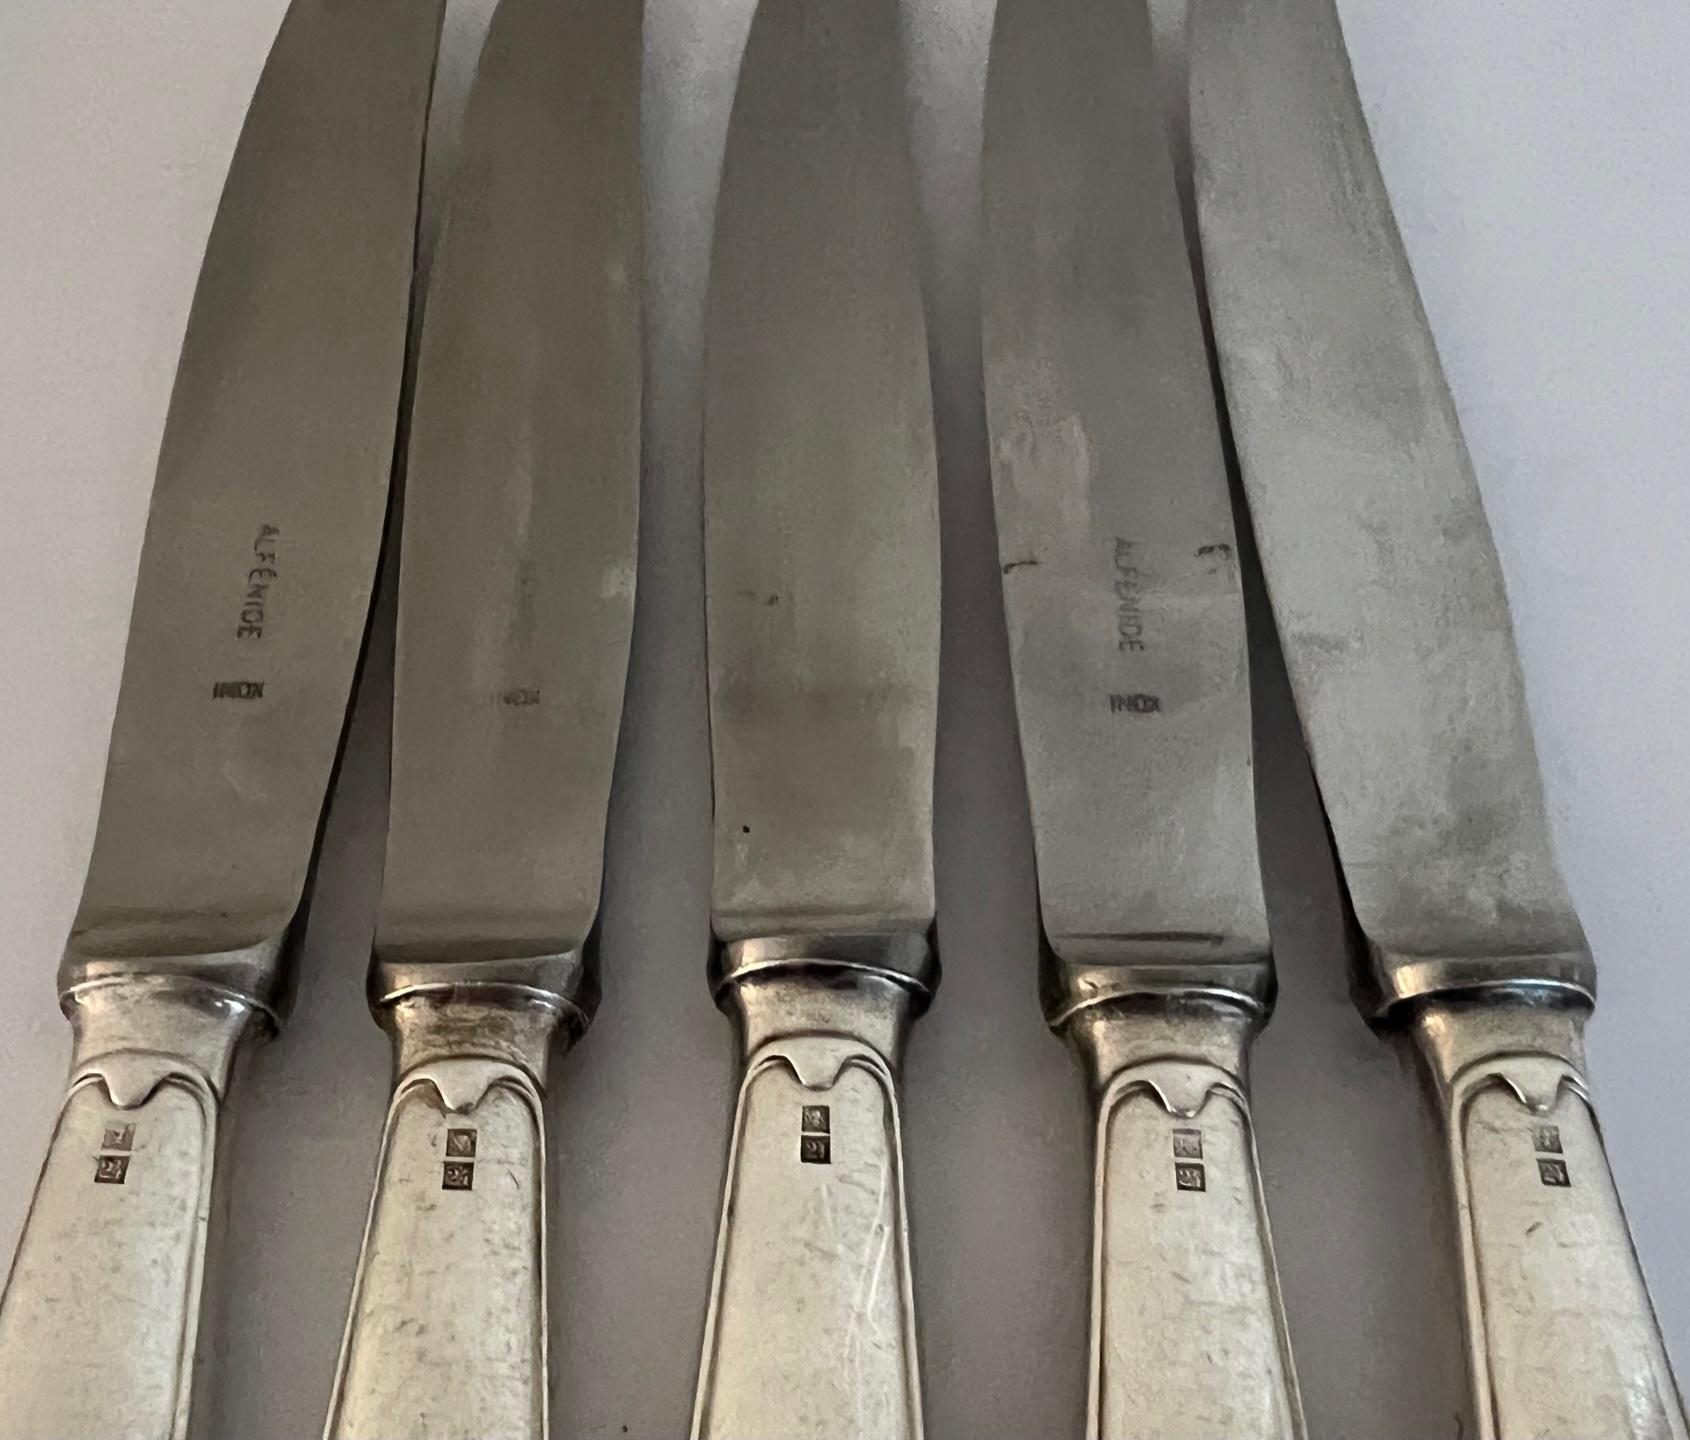 French Provincial French Silverplated Knives by Christofle -Set of 5